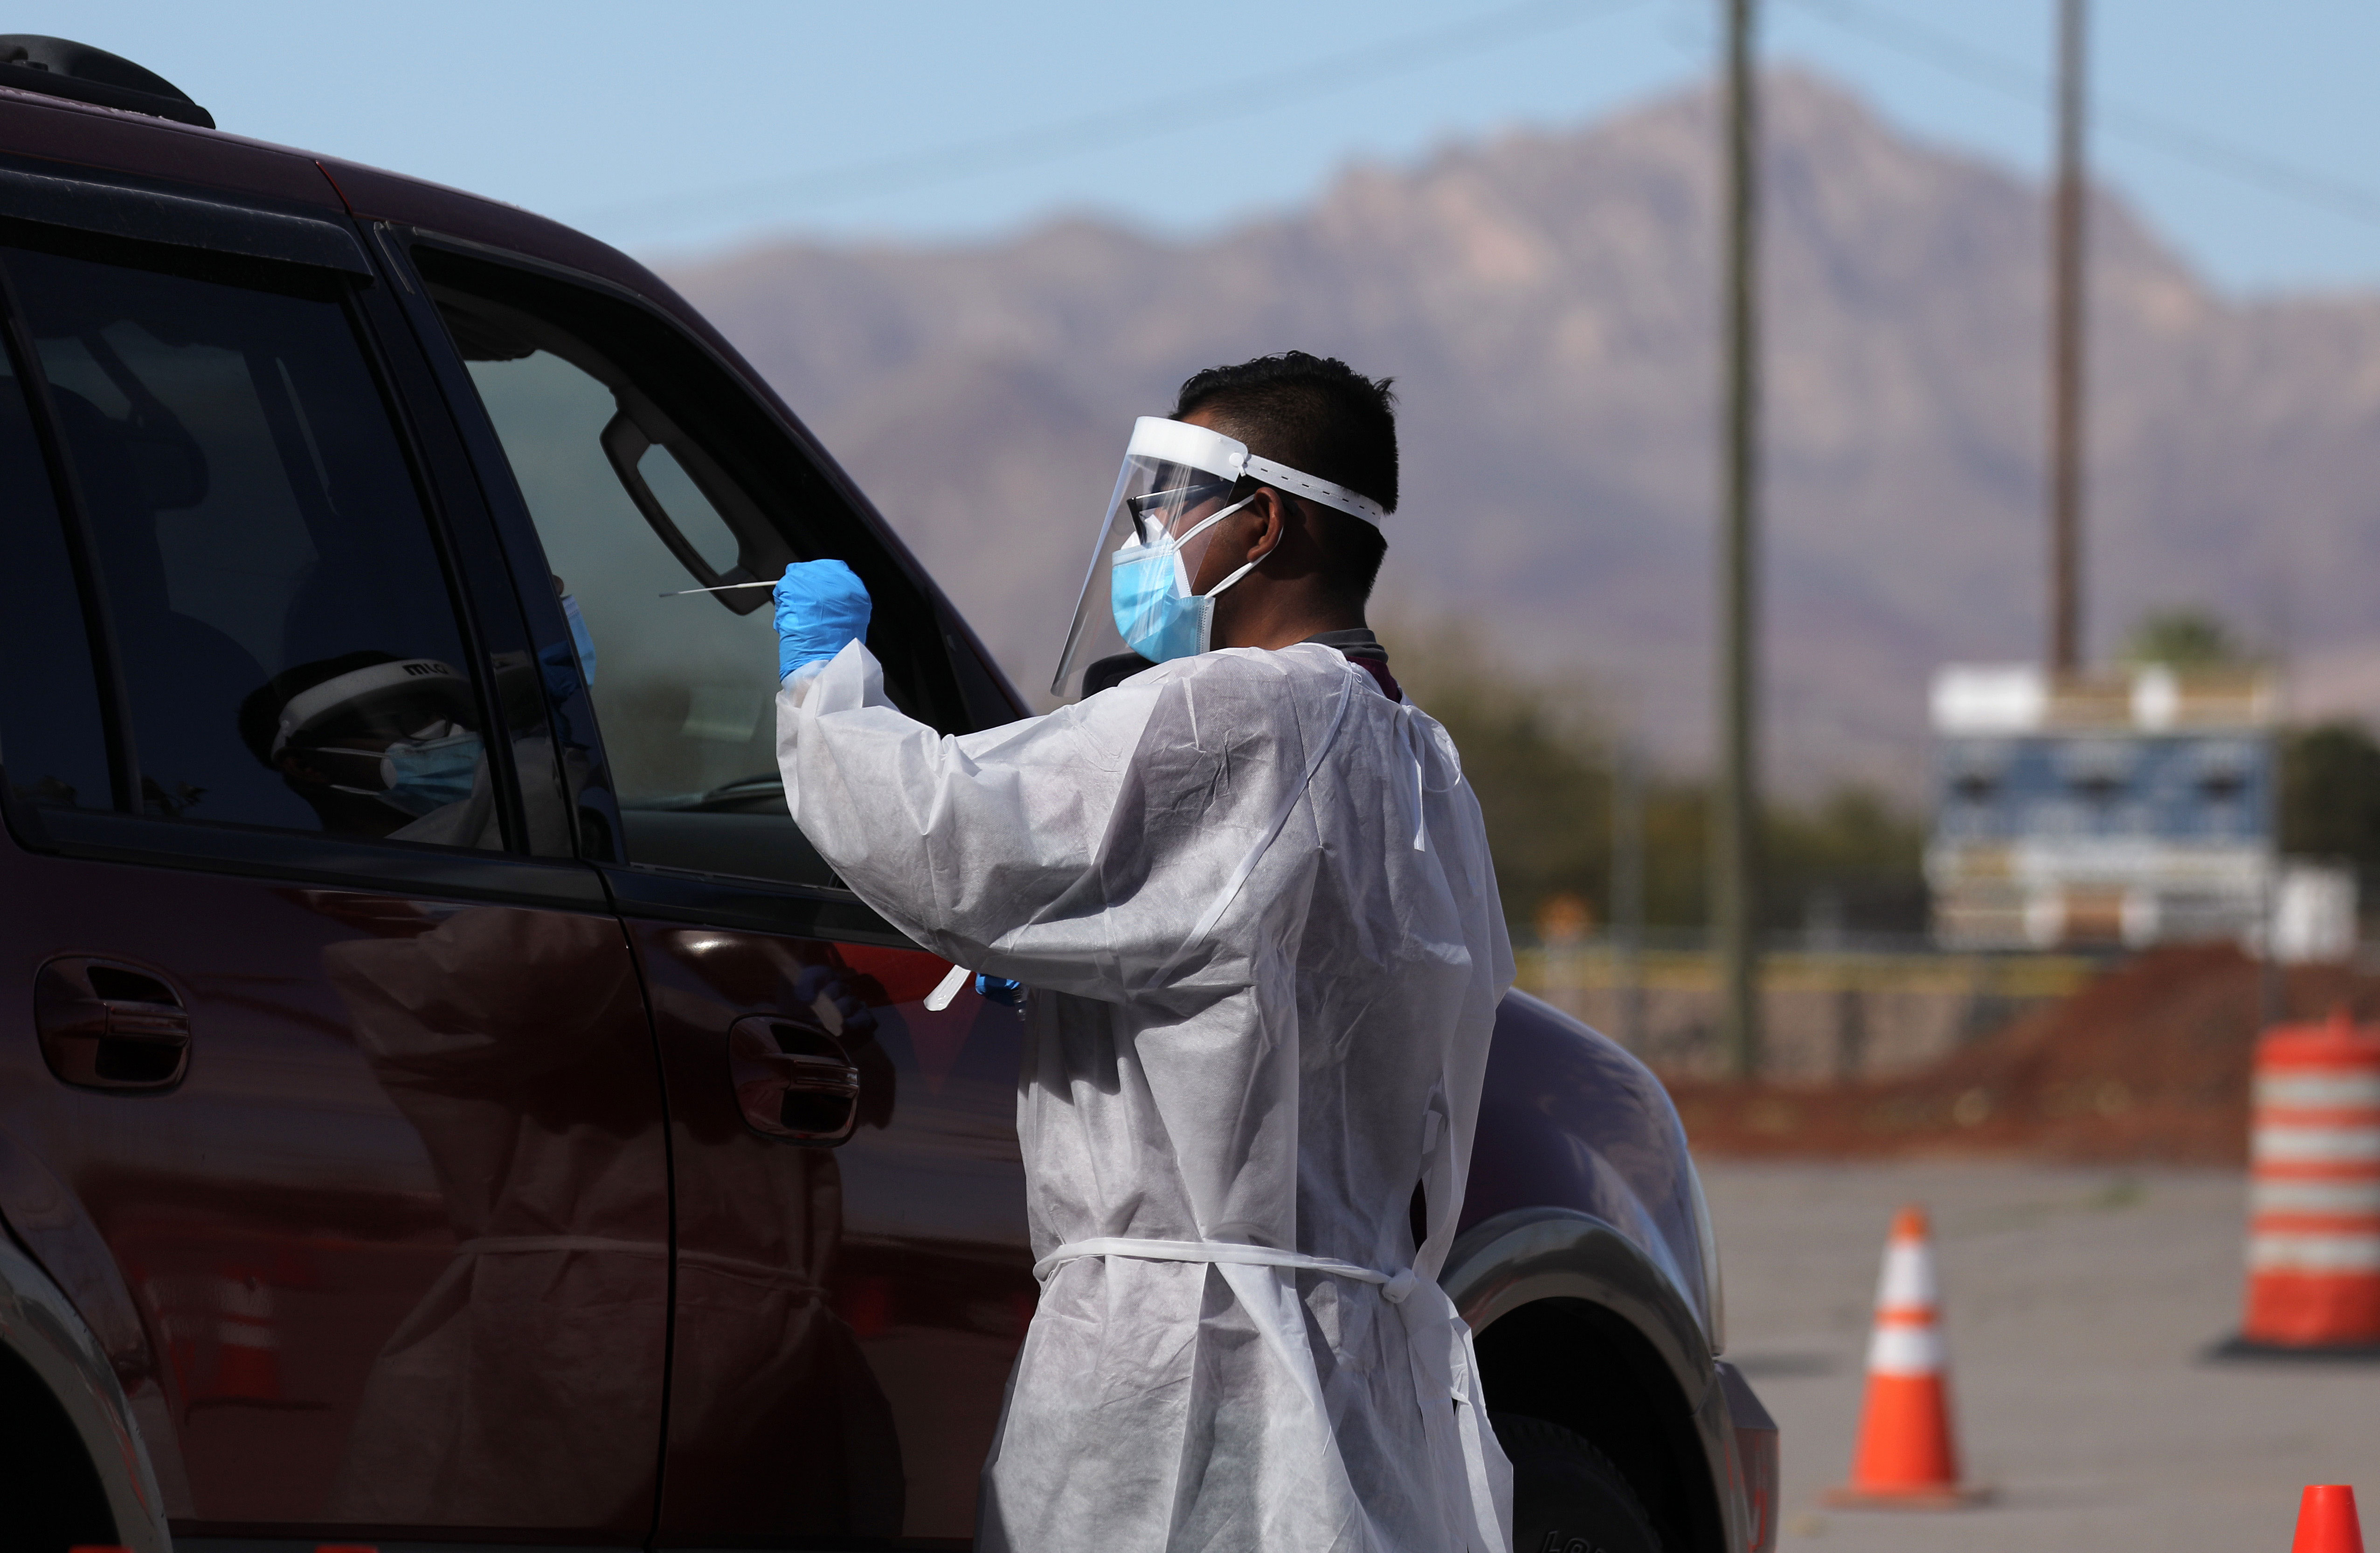 A health care worker administers a Covid-19 swab test on November 13 in El Paso, Texas.